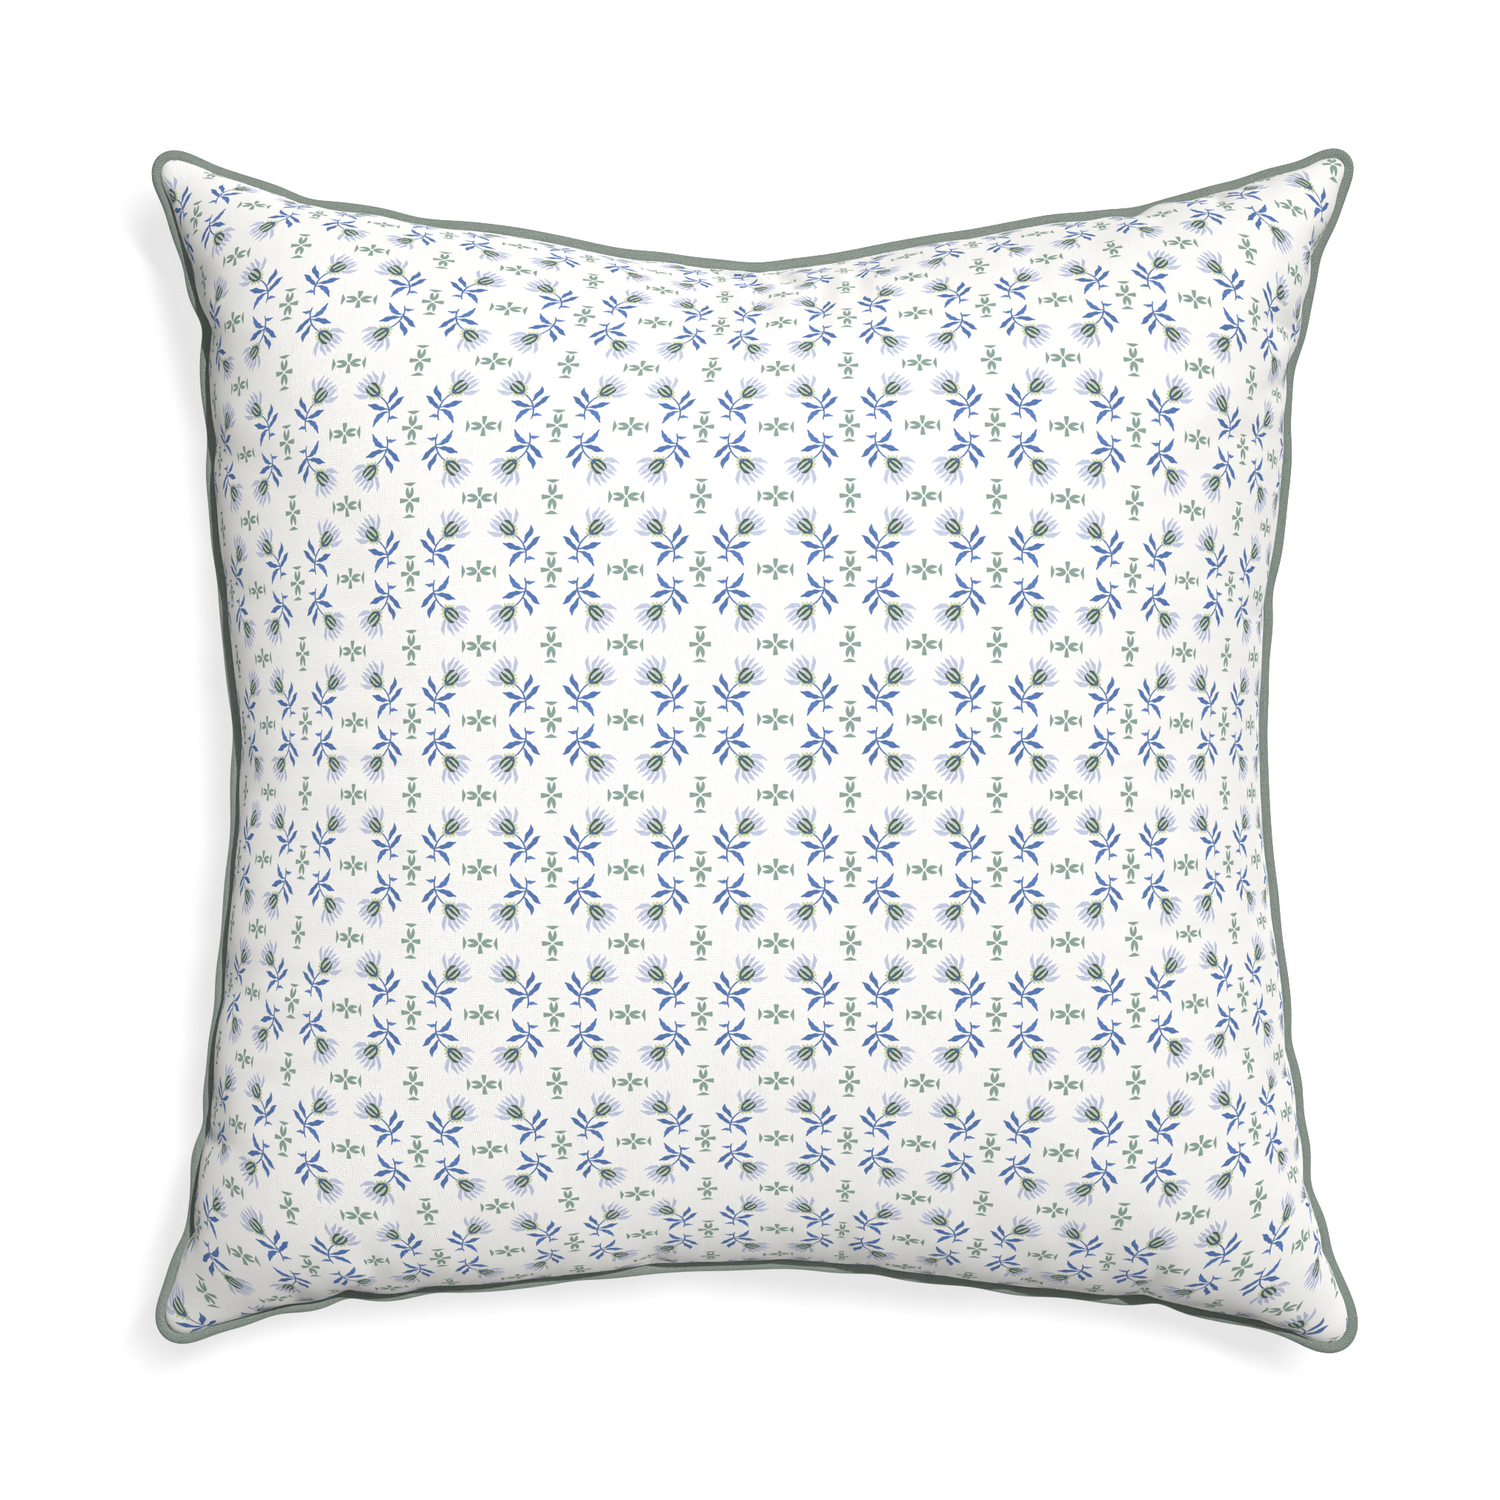 Euro-sham lee custom blue & green floralpillow with sage piping on white background